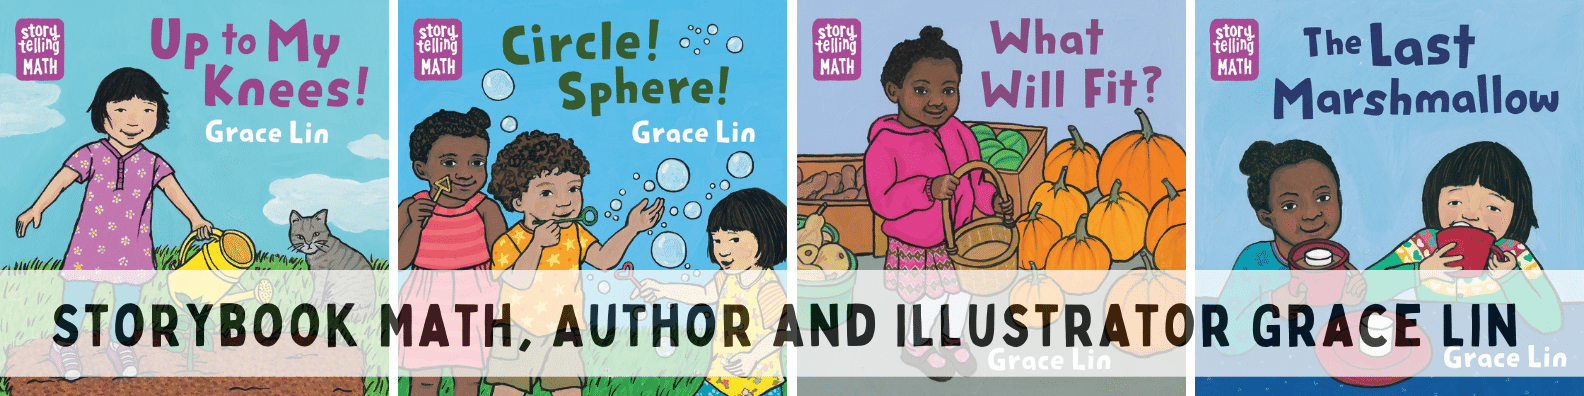 Meet Grace Lin Author and Illustrator of Storytelling Math Book Set